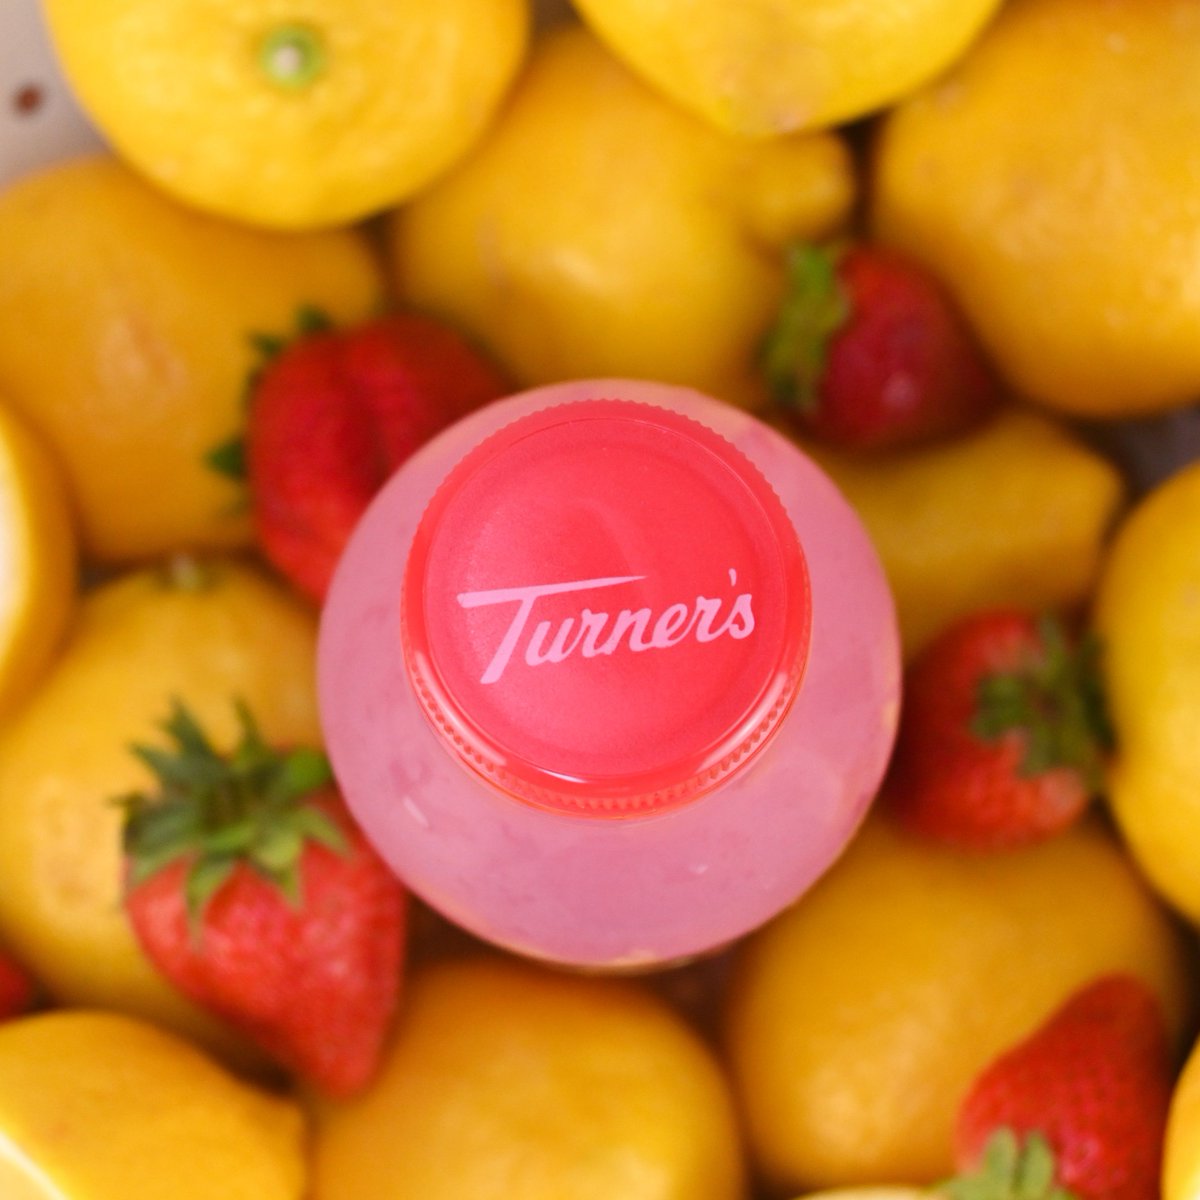 Life is berry sweet when you have Strawberry Lemonade 🍓🍋 #FueledByTurners